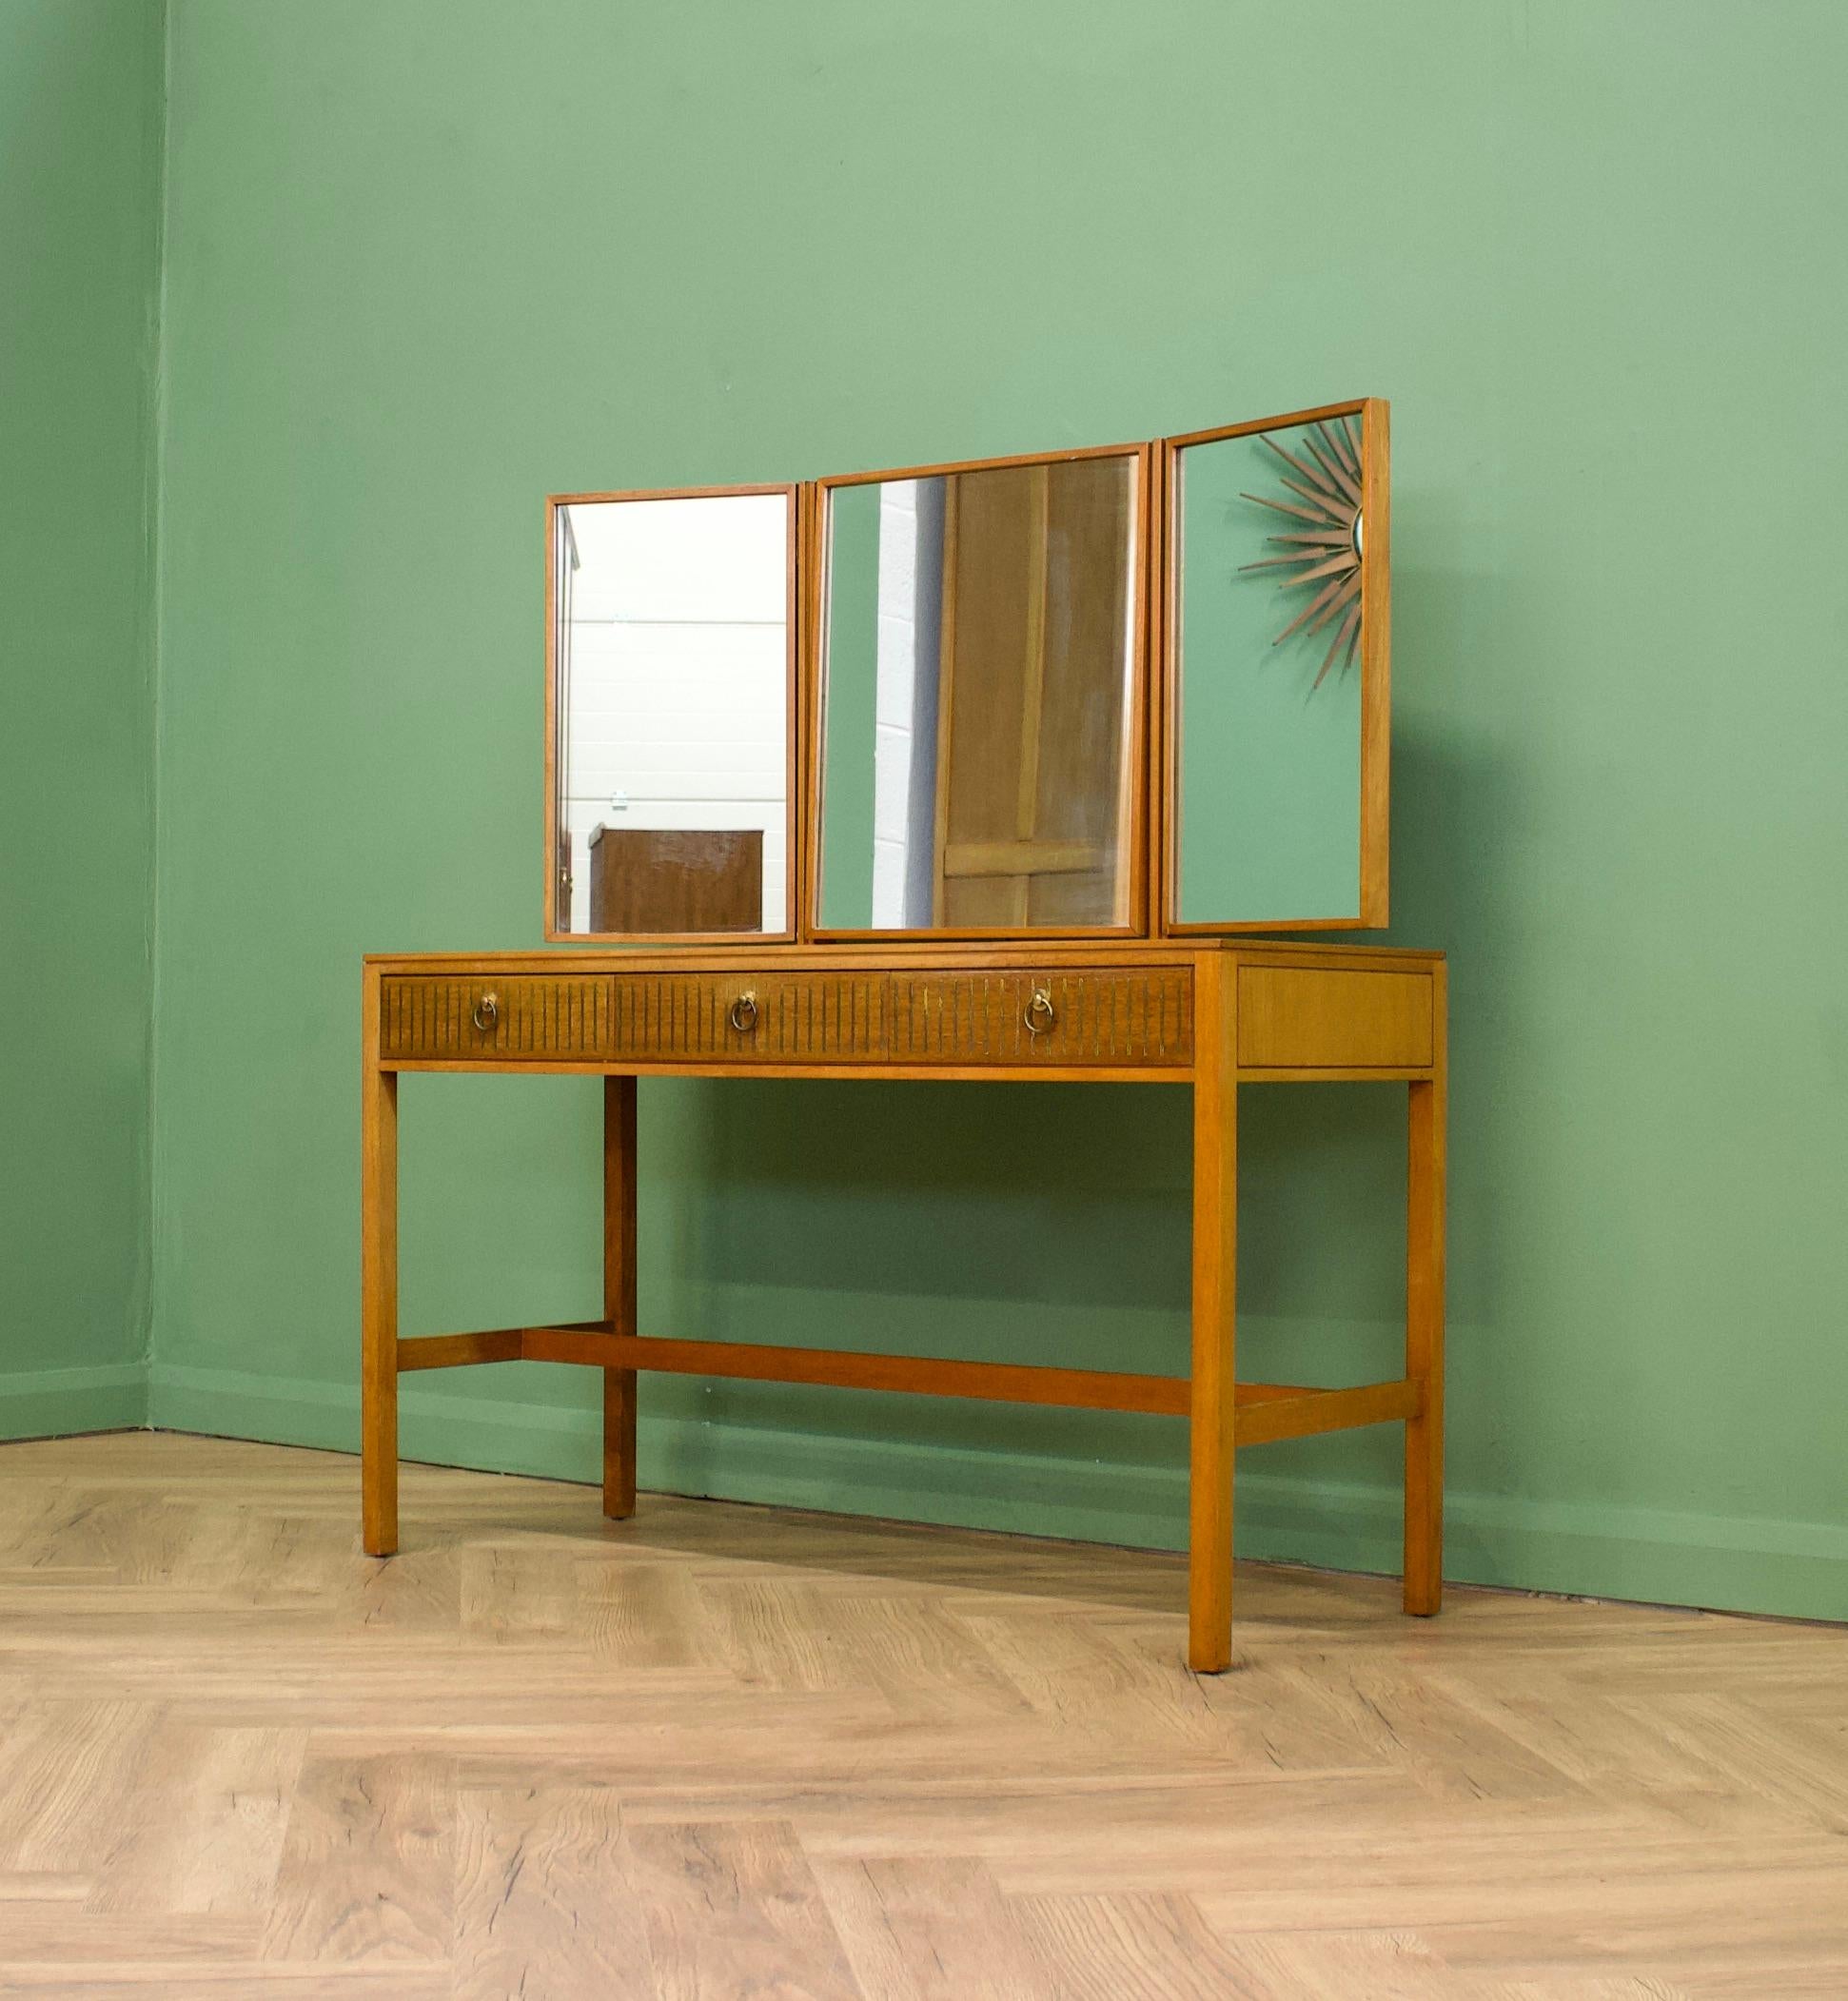 A teak & mahogany dressing table from Loughborough Furniture - retailed through Heals during the 1950s -  designed by Neville Ward and Frank Austin
This piece stands on slim legs and features three drawers - To them is unusual brass inlay details